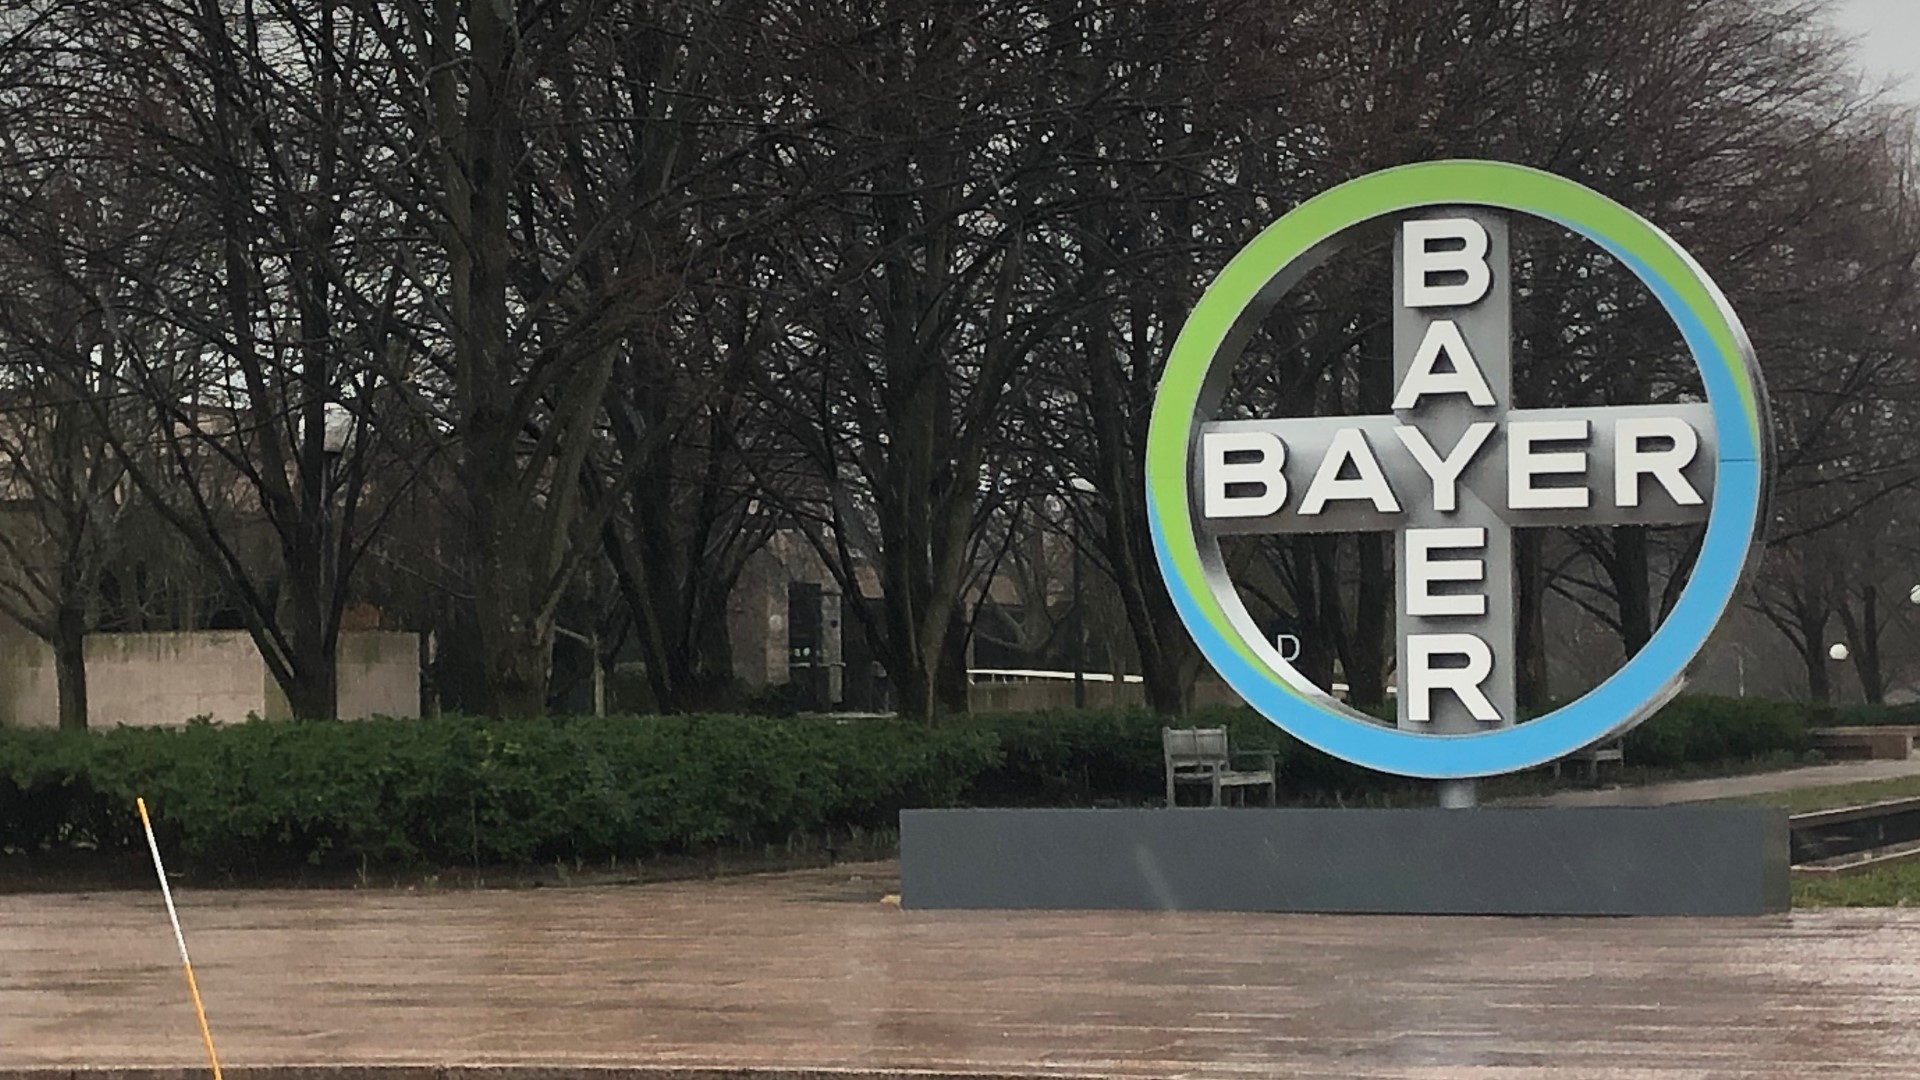 There’s a fierce debate about the safety of Roundup weed-killer. Its parent company Bayer has shelled out billions of dollars to defend it.